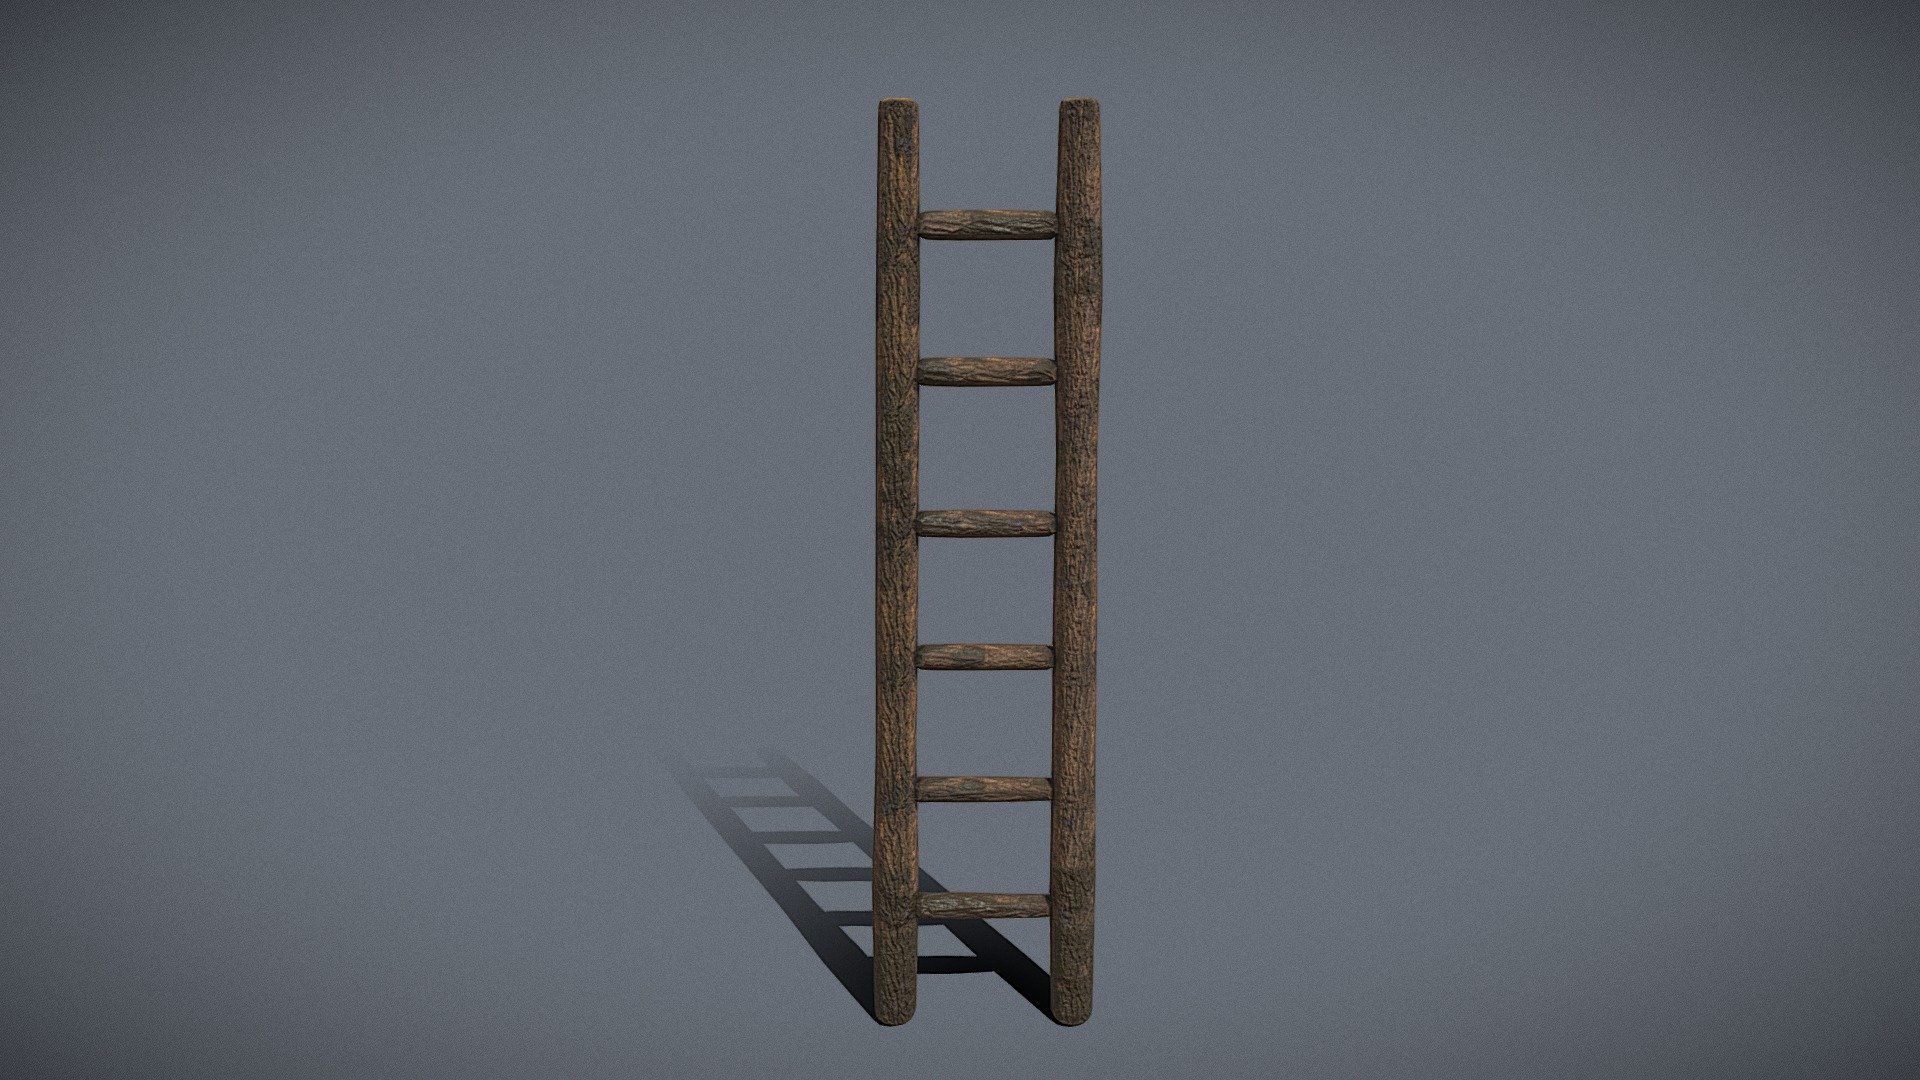 Muddy Ladder 3D Model PBR Texture available in 4096 x 4096 Scaled to real world scale From the Creators at Get Dead Entertainment. Please like and Rate! Follow us on FaceBook and Instagram to keep updated on all our newest models. https://www.facebook.com/GetDeadEntertainment/ - Ladder muddy - Download Free 3D model by GetDeadEntertainment 3d model